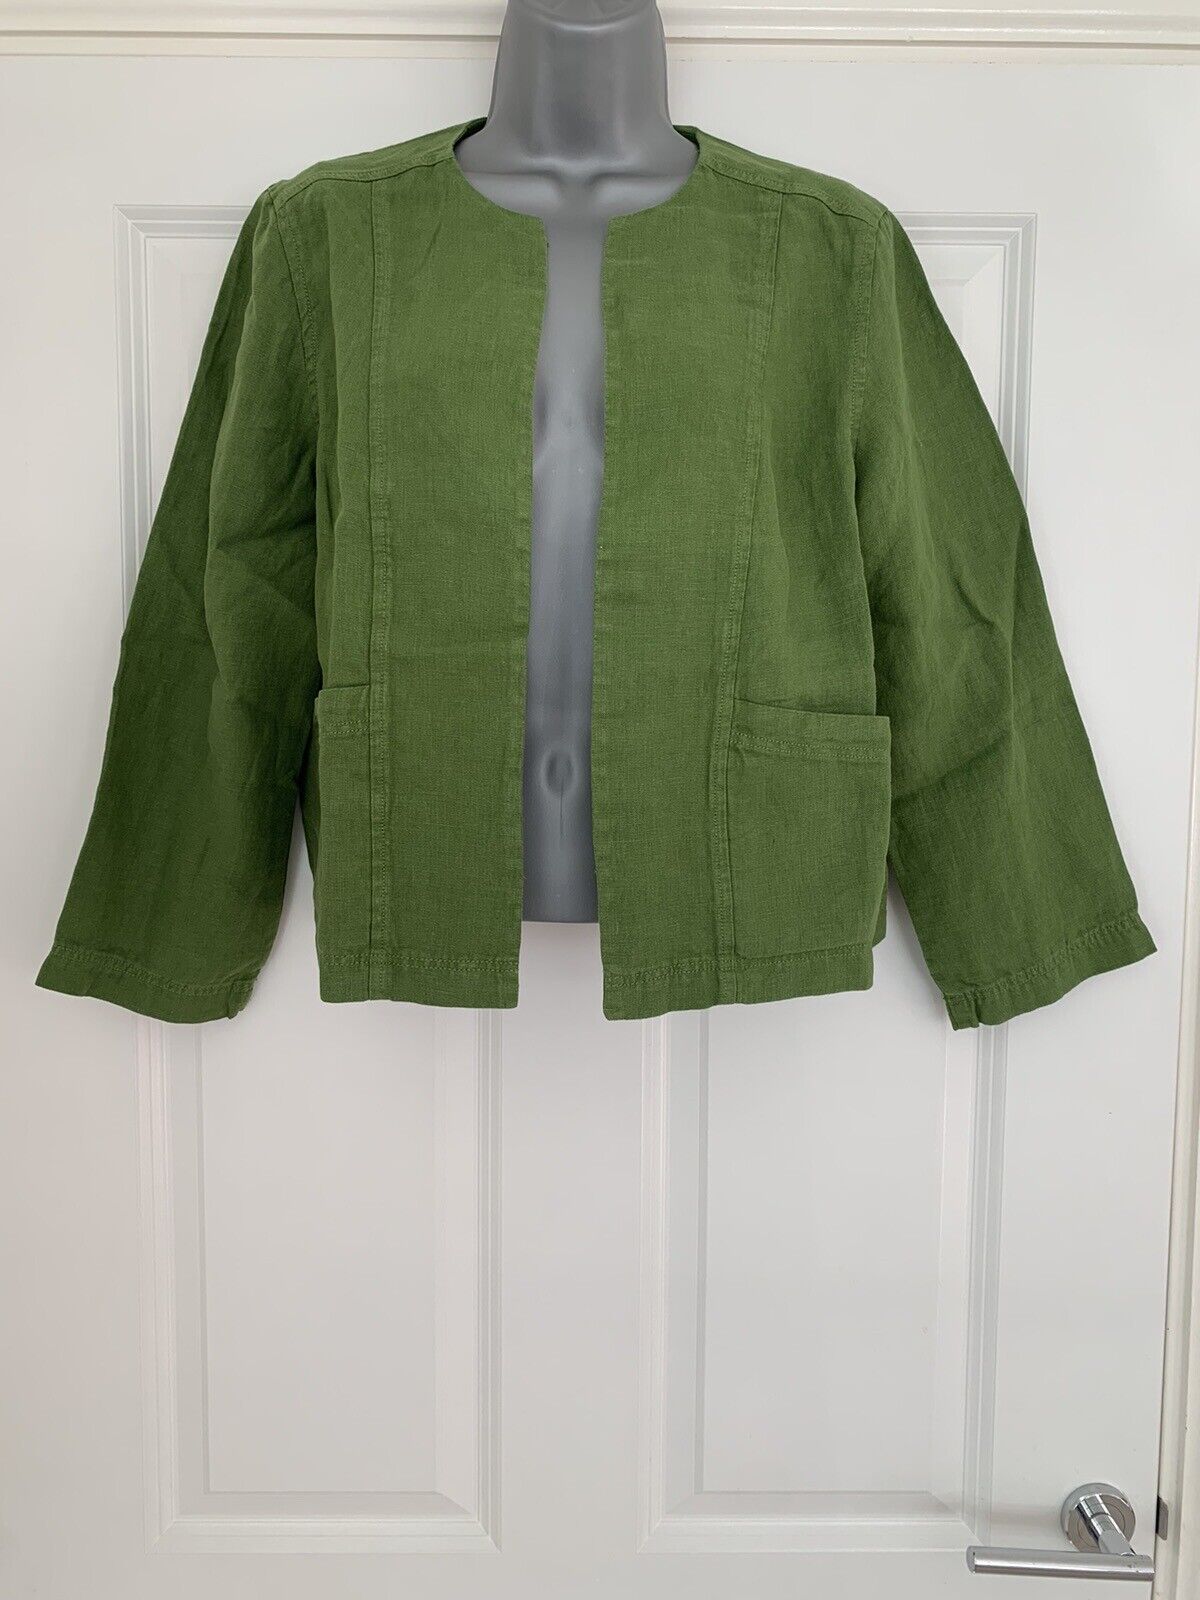 EX Seasalt Jacket Green Country House Linen Jacket Spring Grass 10-28 RRP £75